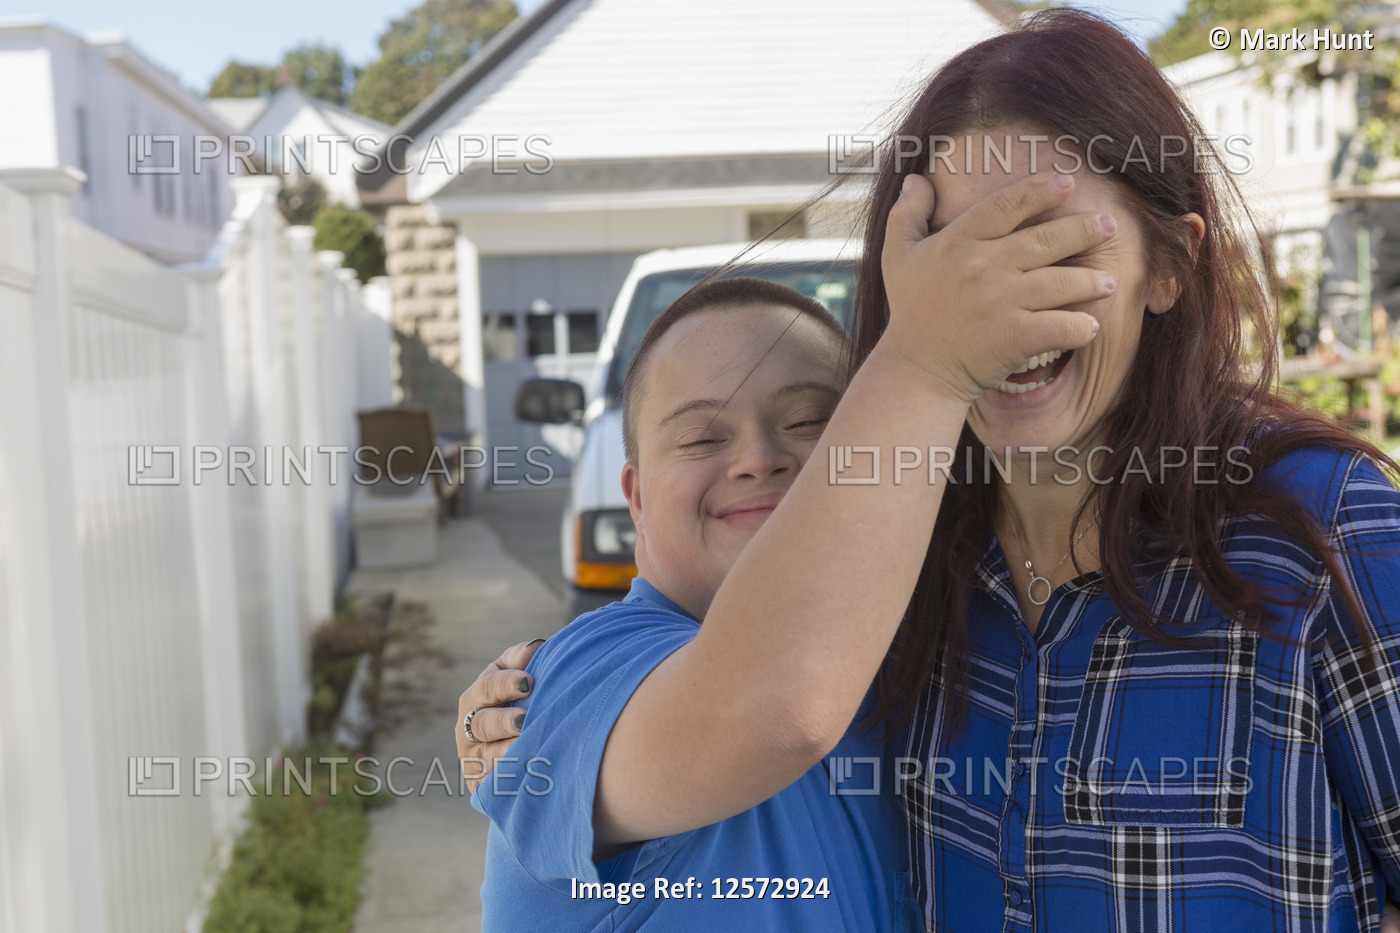 Teen who has Down Syndrome with his friend